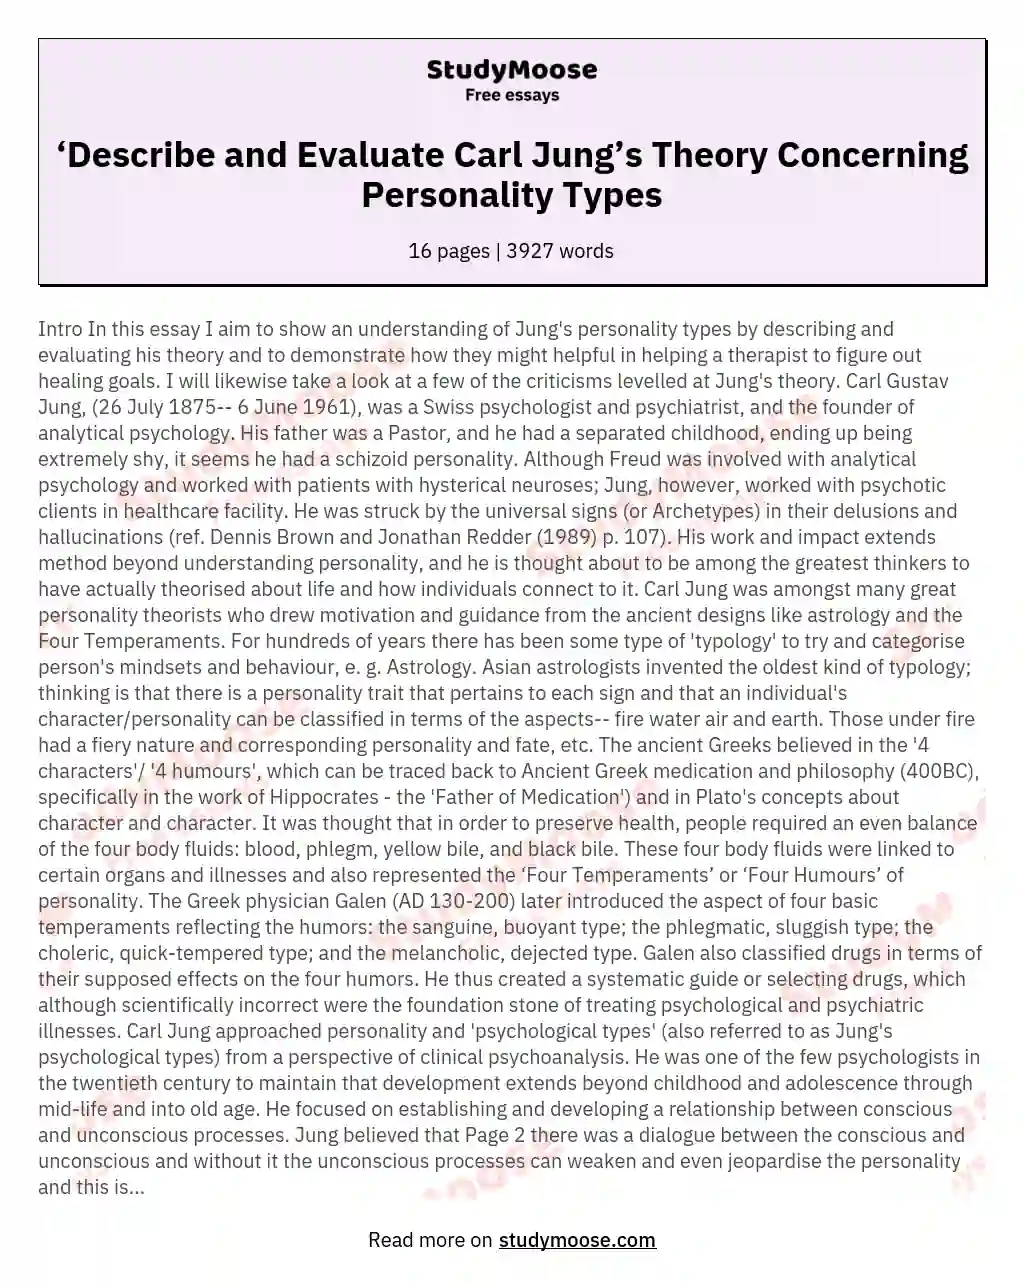 ‘Describe and Evaluate Carl Jung’s Theory Concerning Personality Types essay